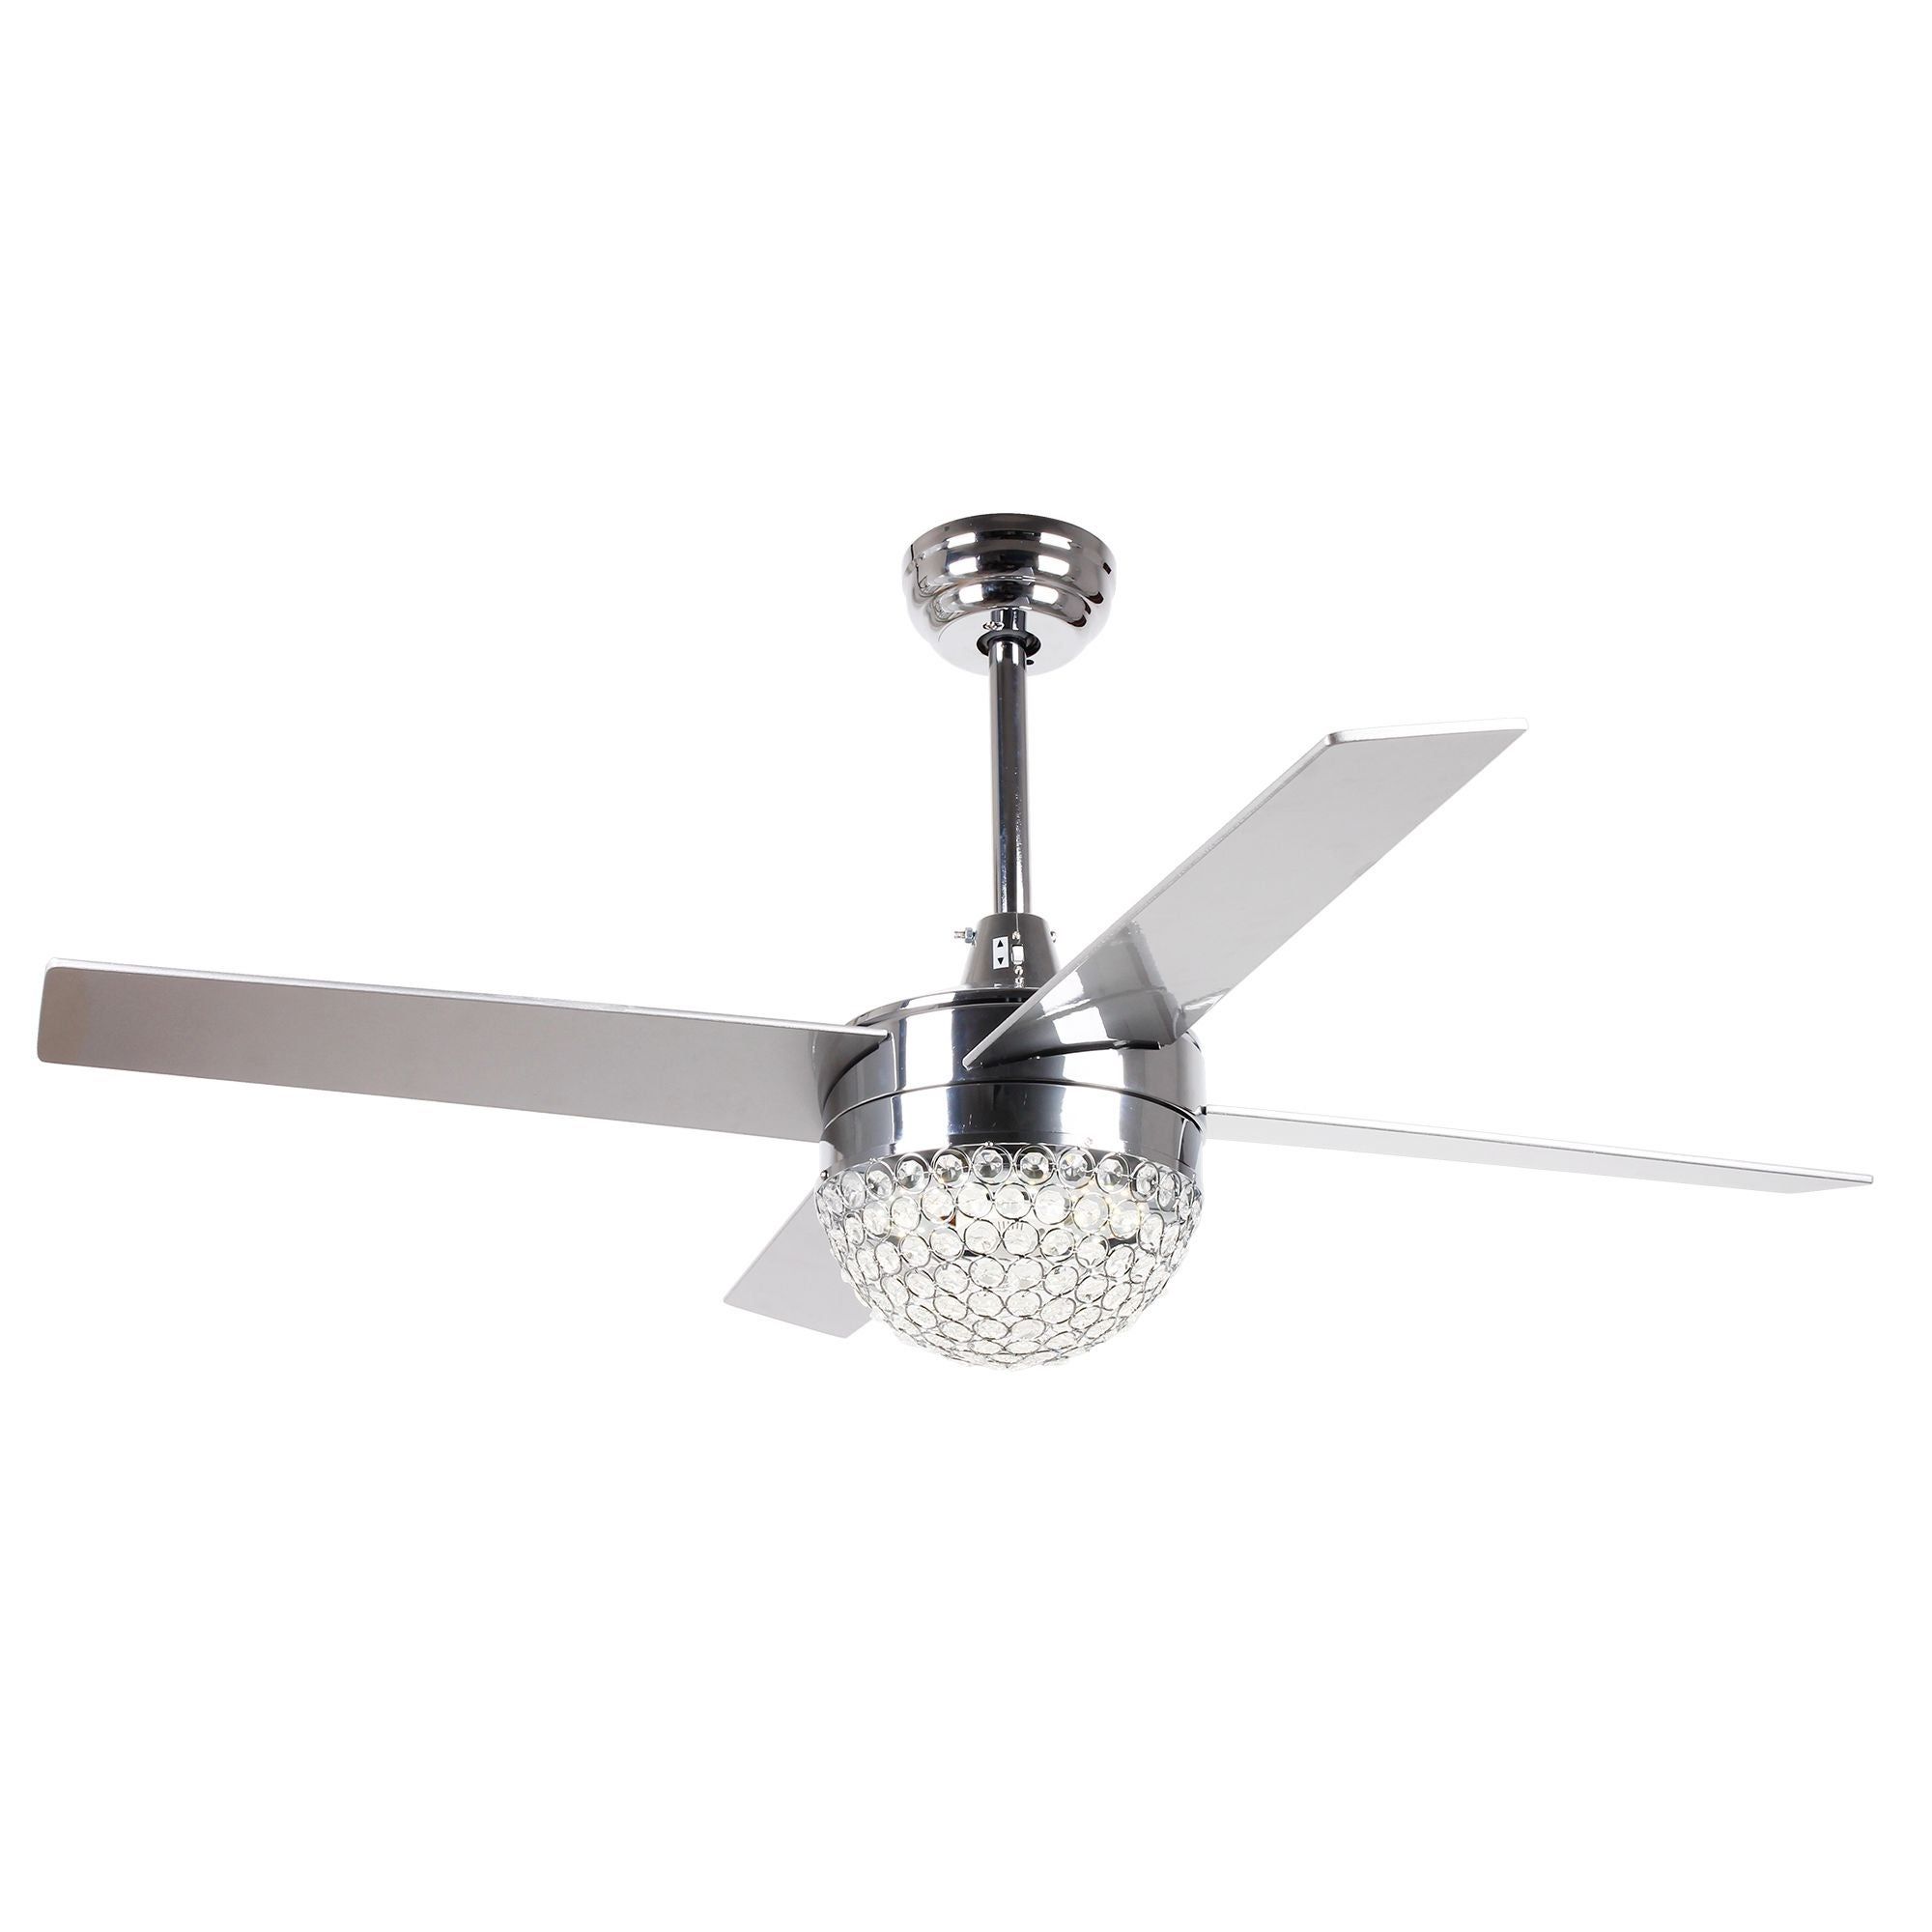 Best And Newest Marcoux 5 Blade Ceiling Fans With Collection Ceiling Fan With Remote Pictures – Home Design Ideas (View 16 of 20)